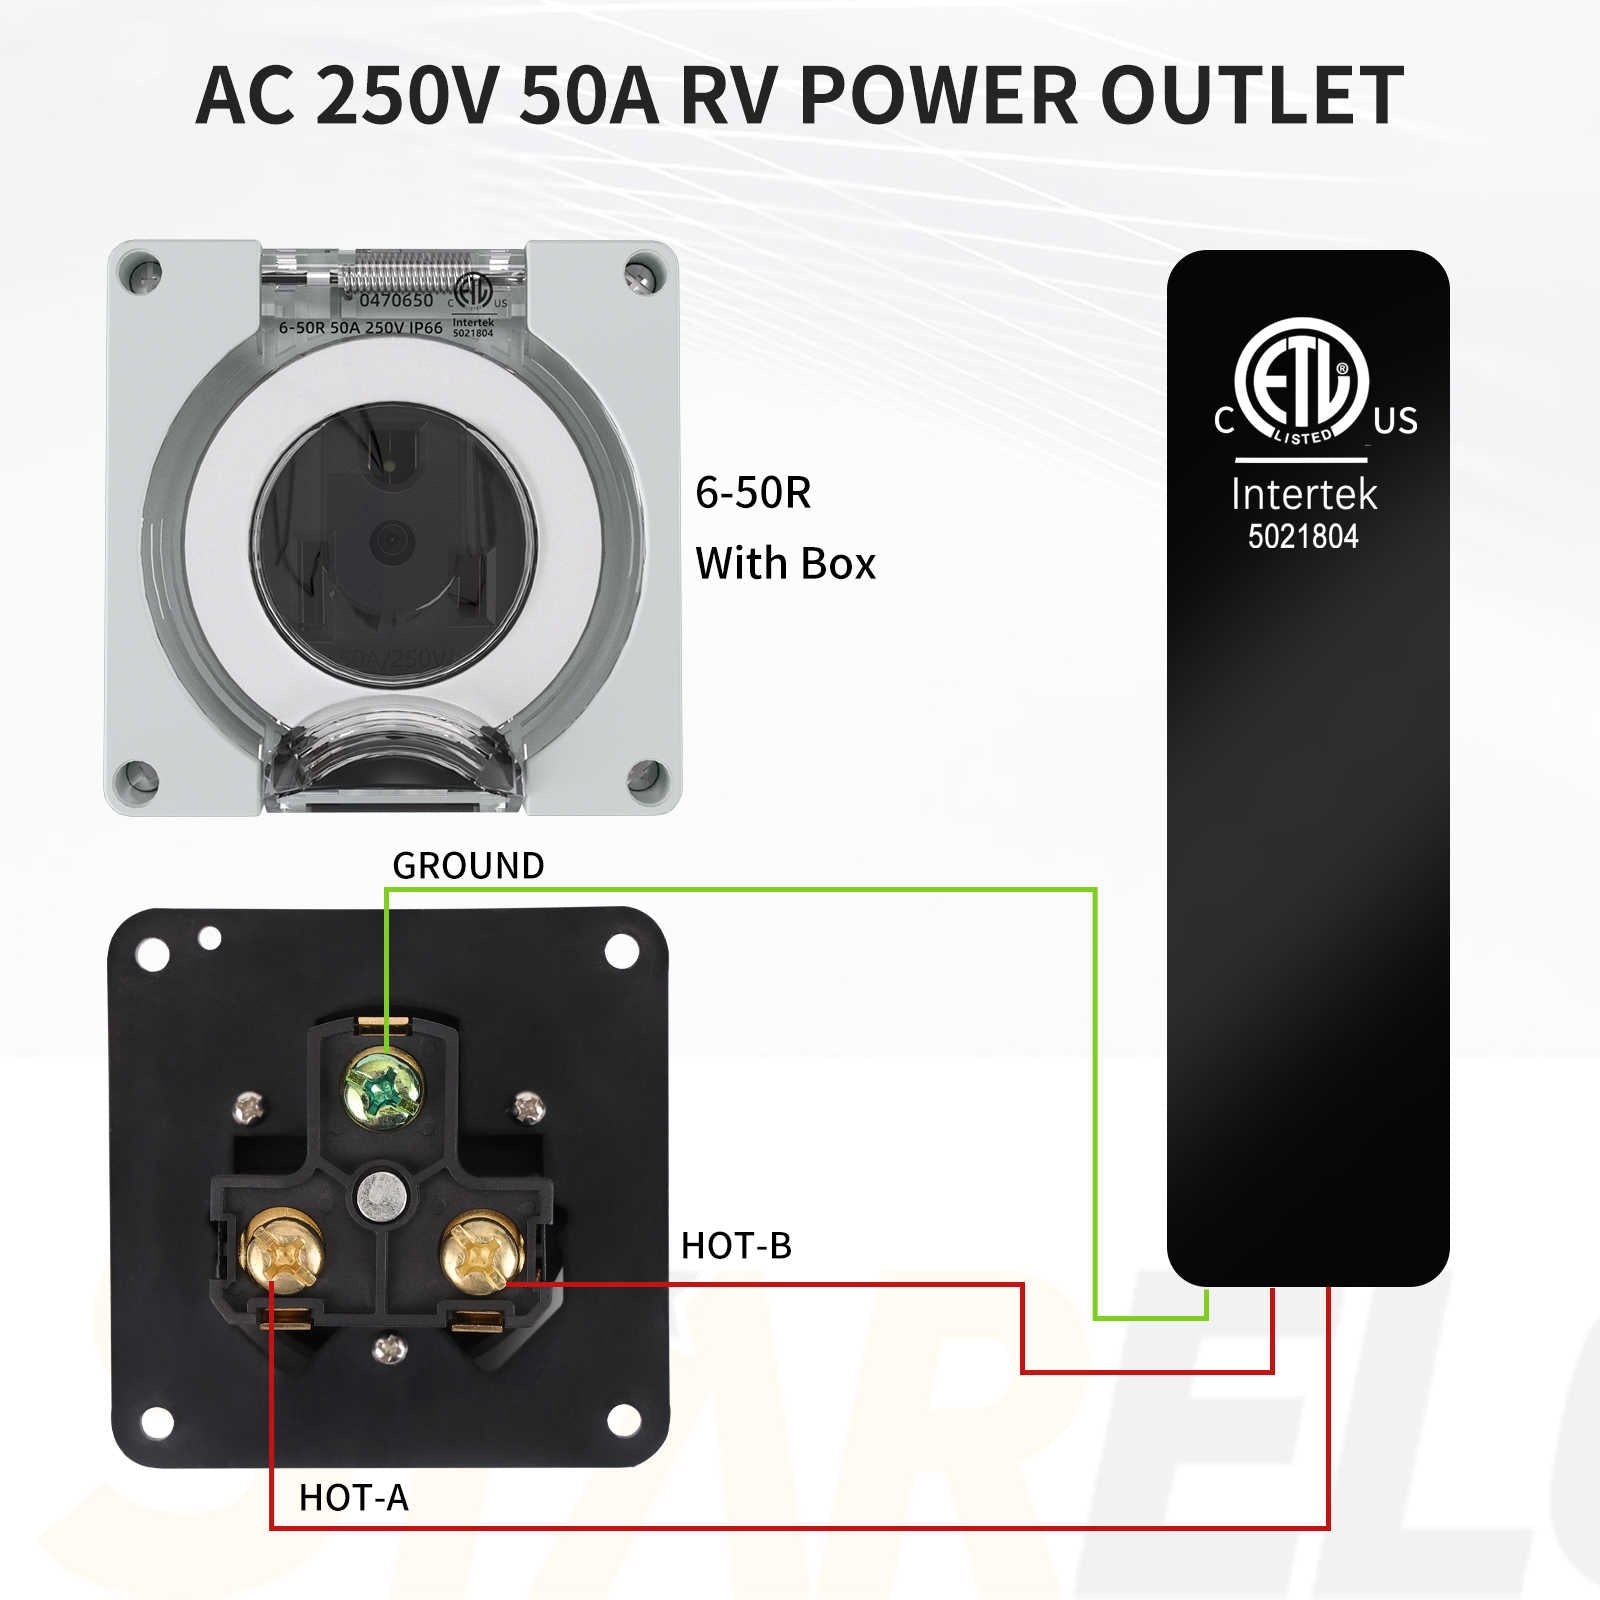 6-50R 50Amp power outlet box wiring diagram